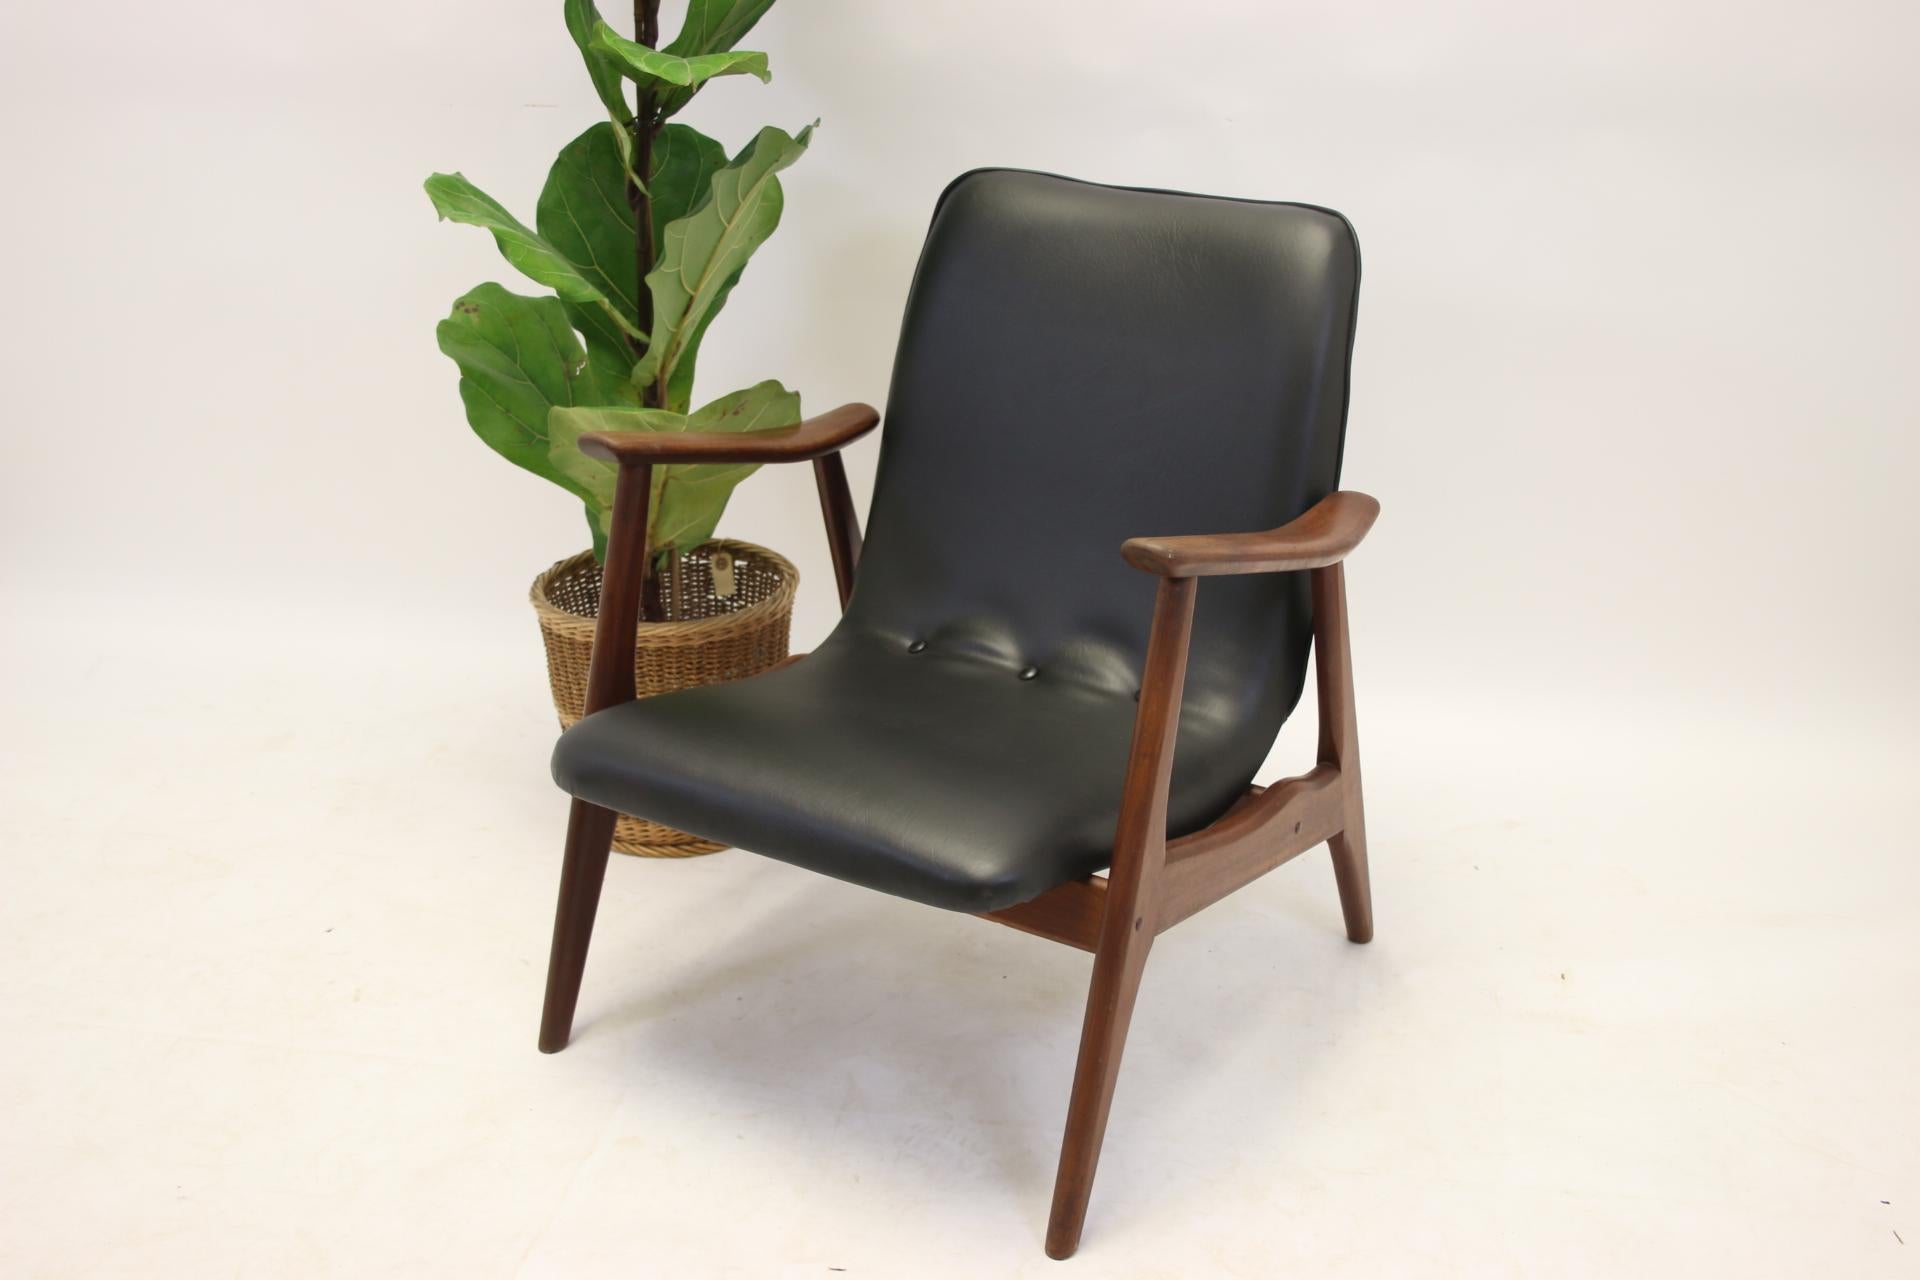 Stylish and organic armchair designed by Louis van Teeffelen for Wébé, 1960s.

Armchair made of Afromosia wood, reupholstered with the original color and type of leather. The beautifully designed frame is made of darkwood.

The armchair has a very